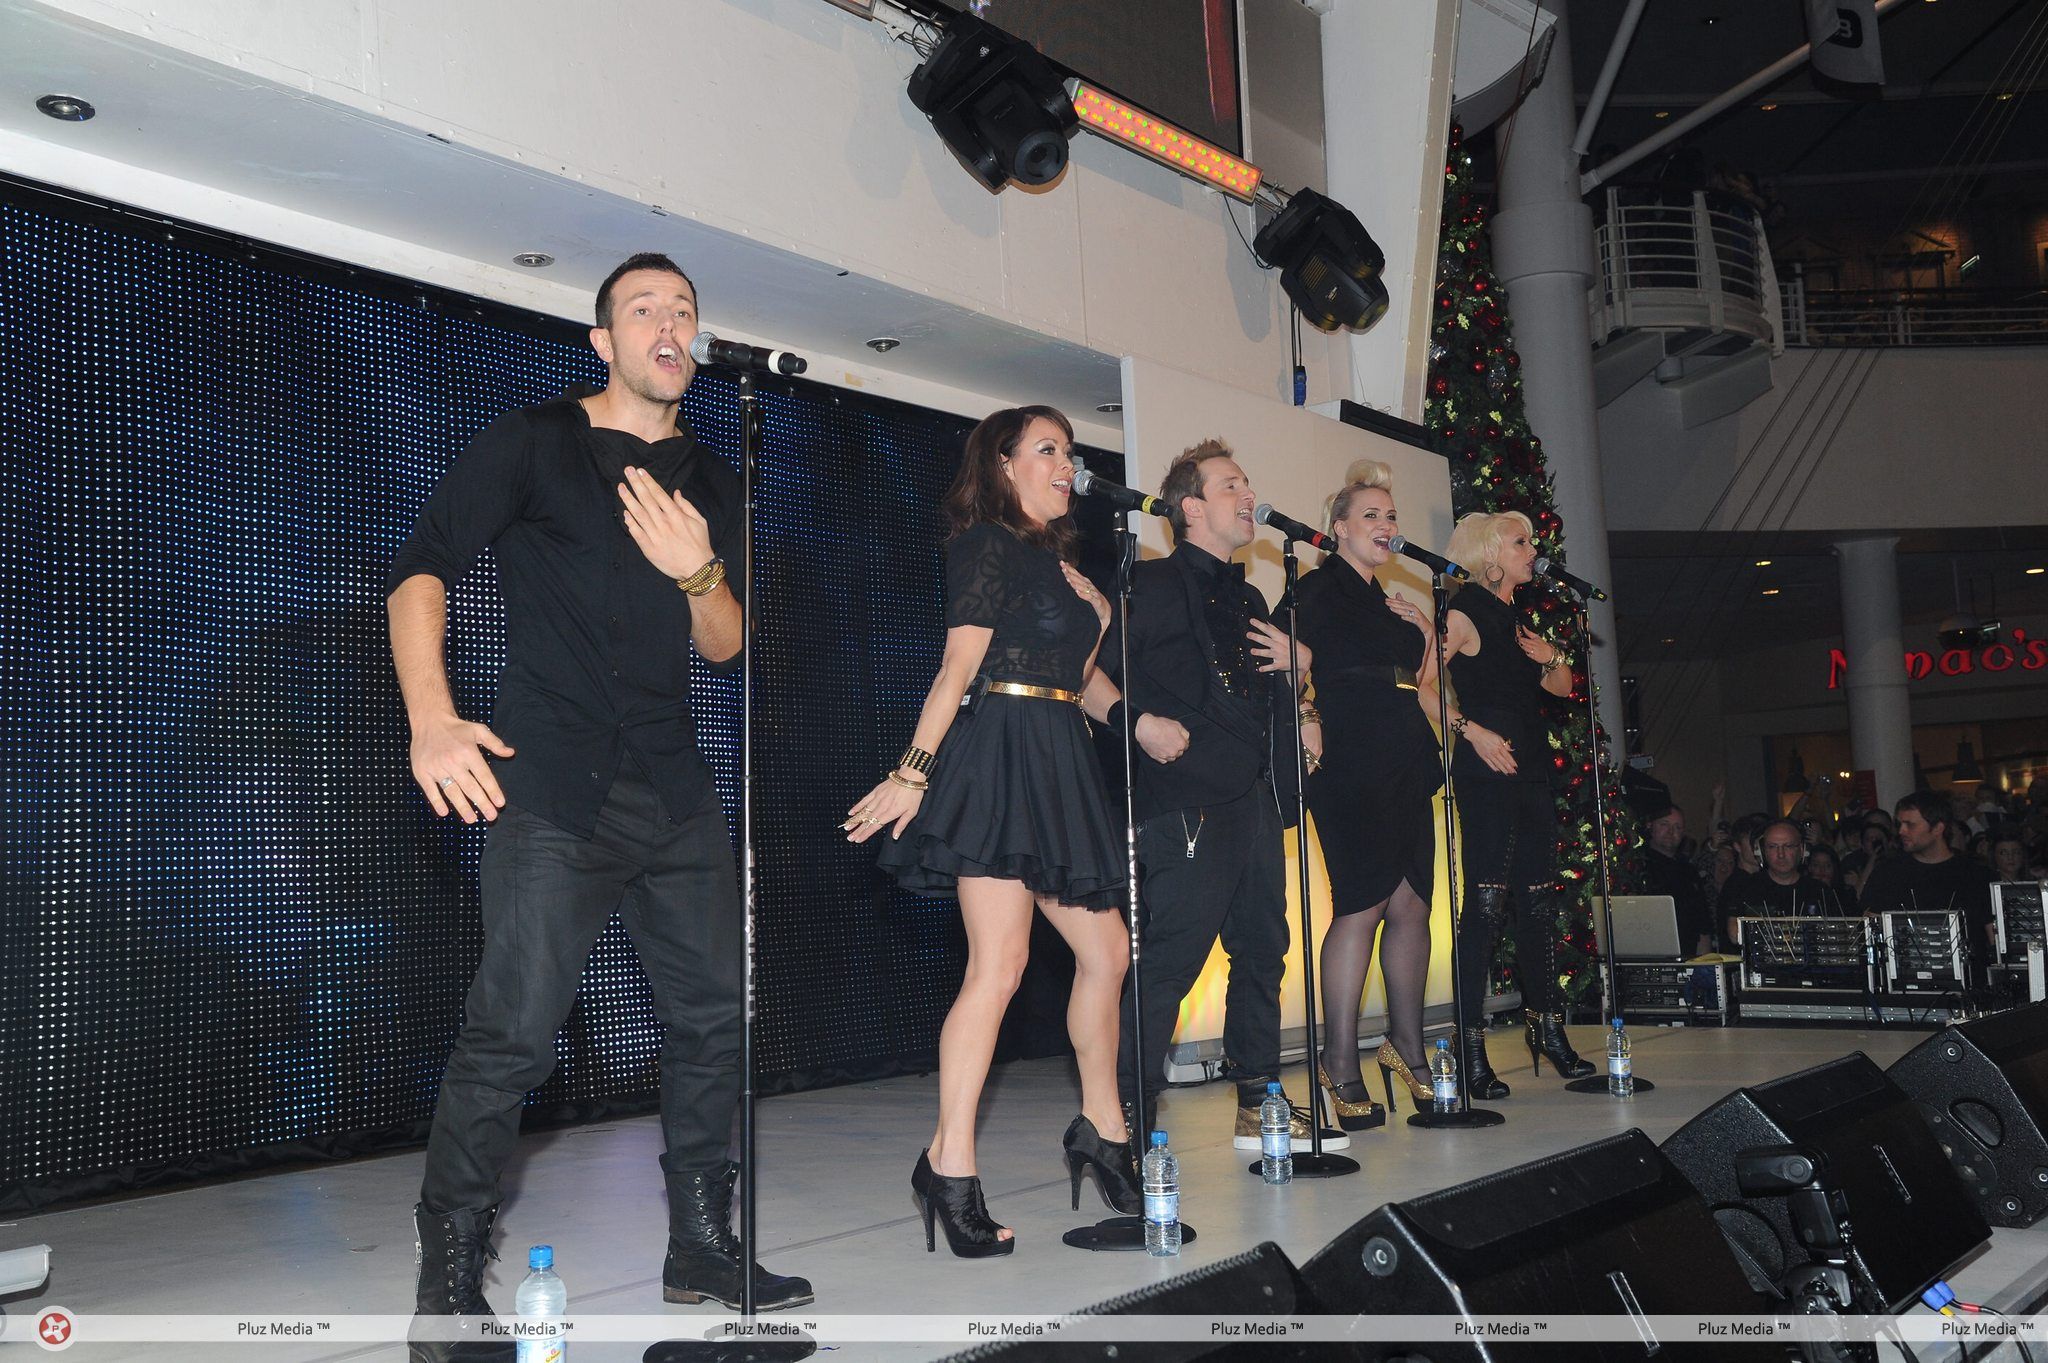 Steps' performs live at the Trafford centre in Manchester | Picture 111536